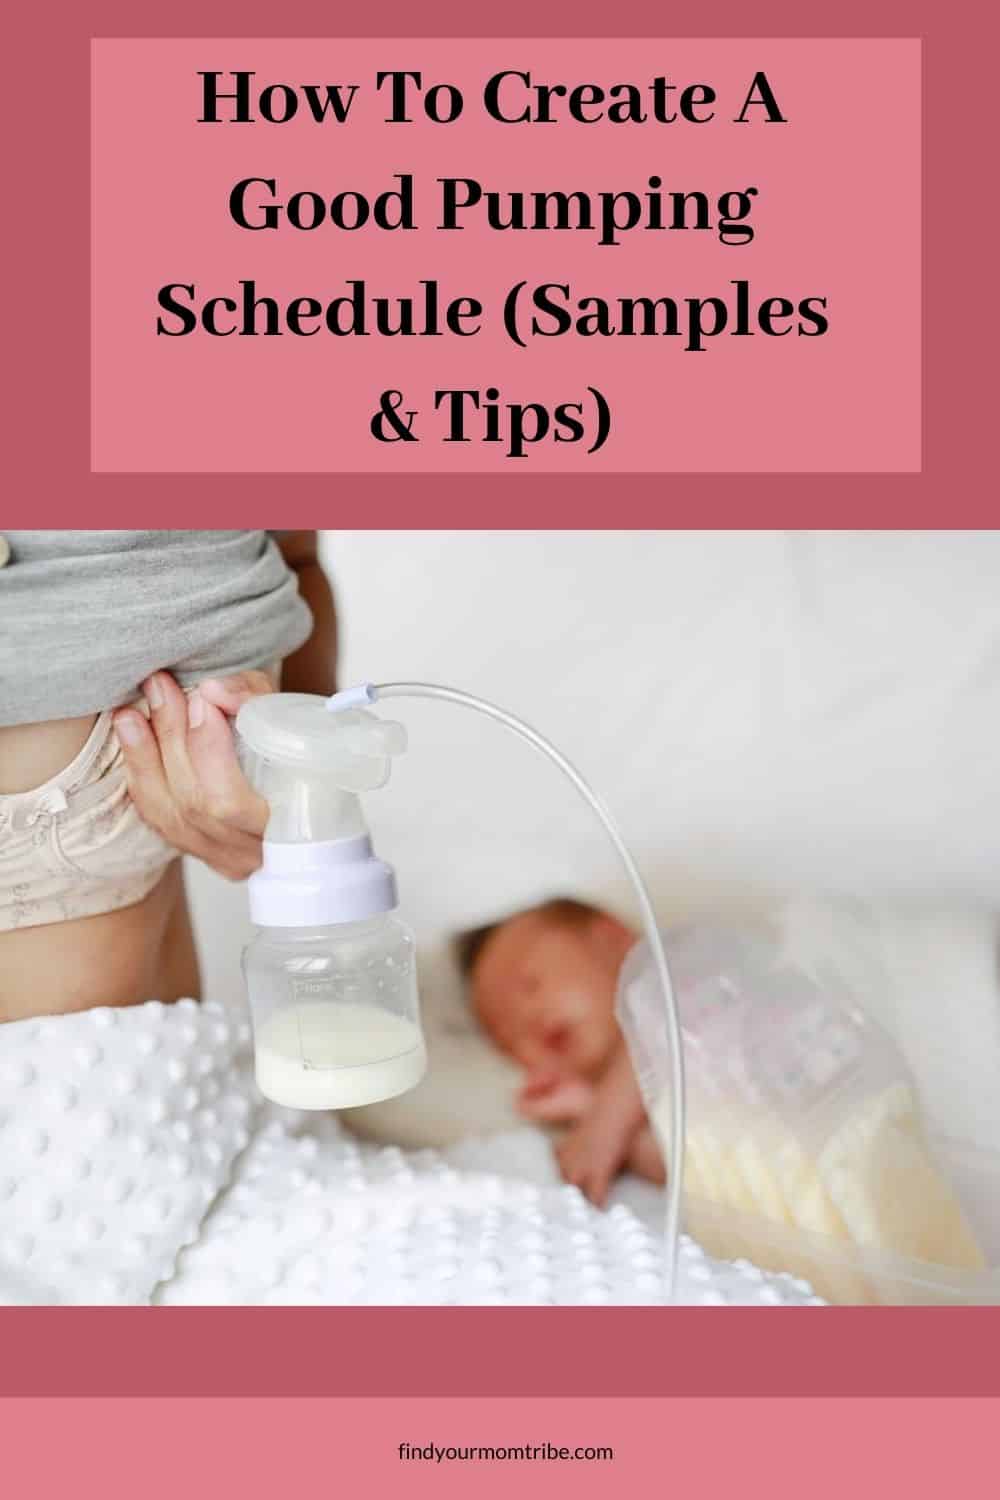 How To Create A Good Pumping Schedule (Samples & Tips)